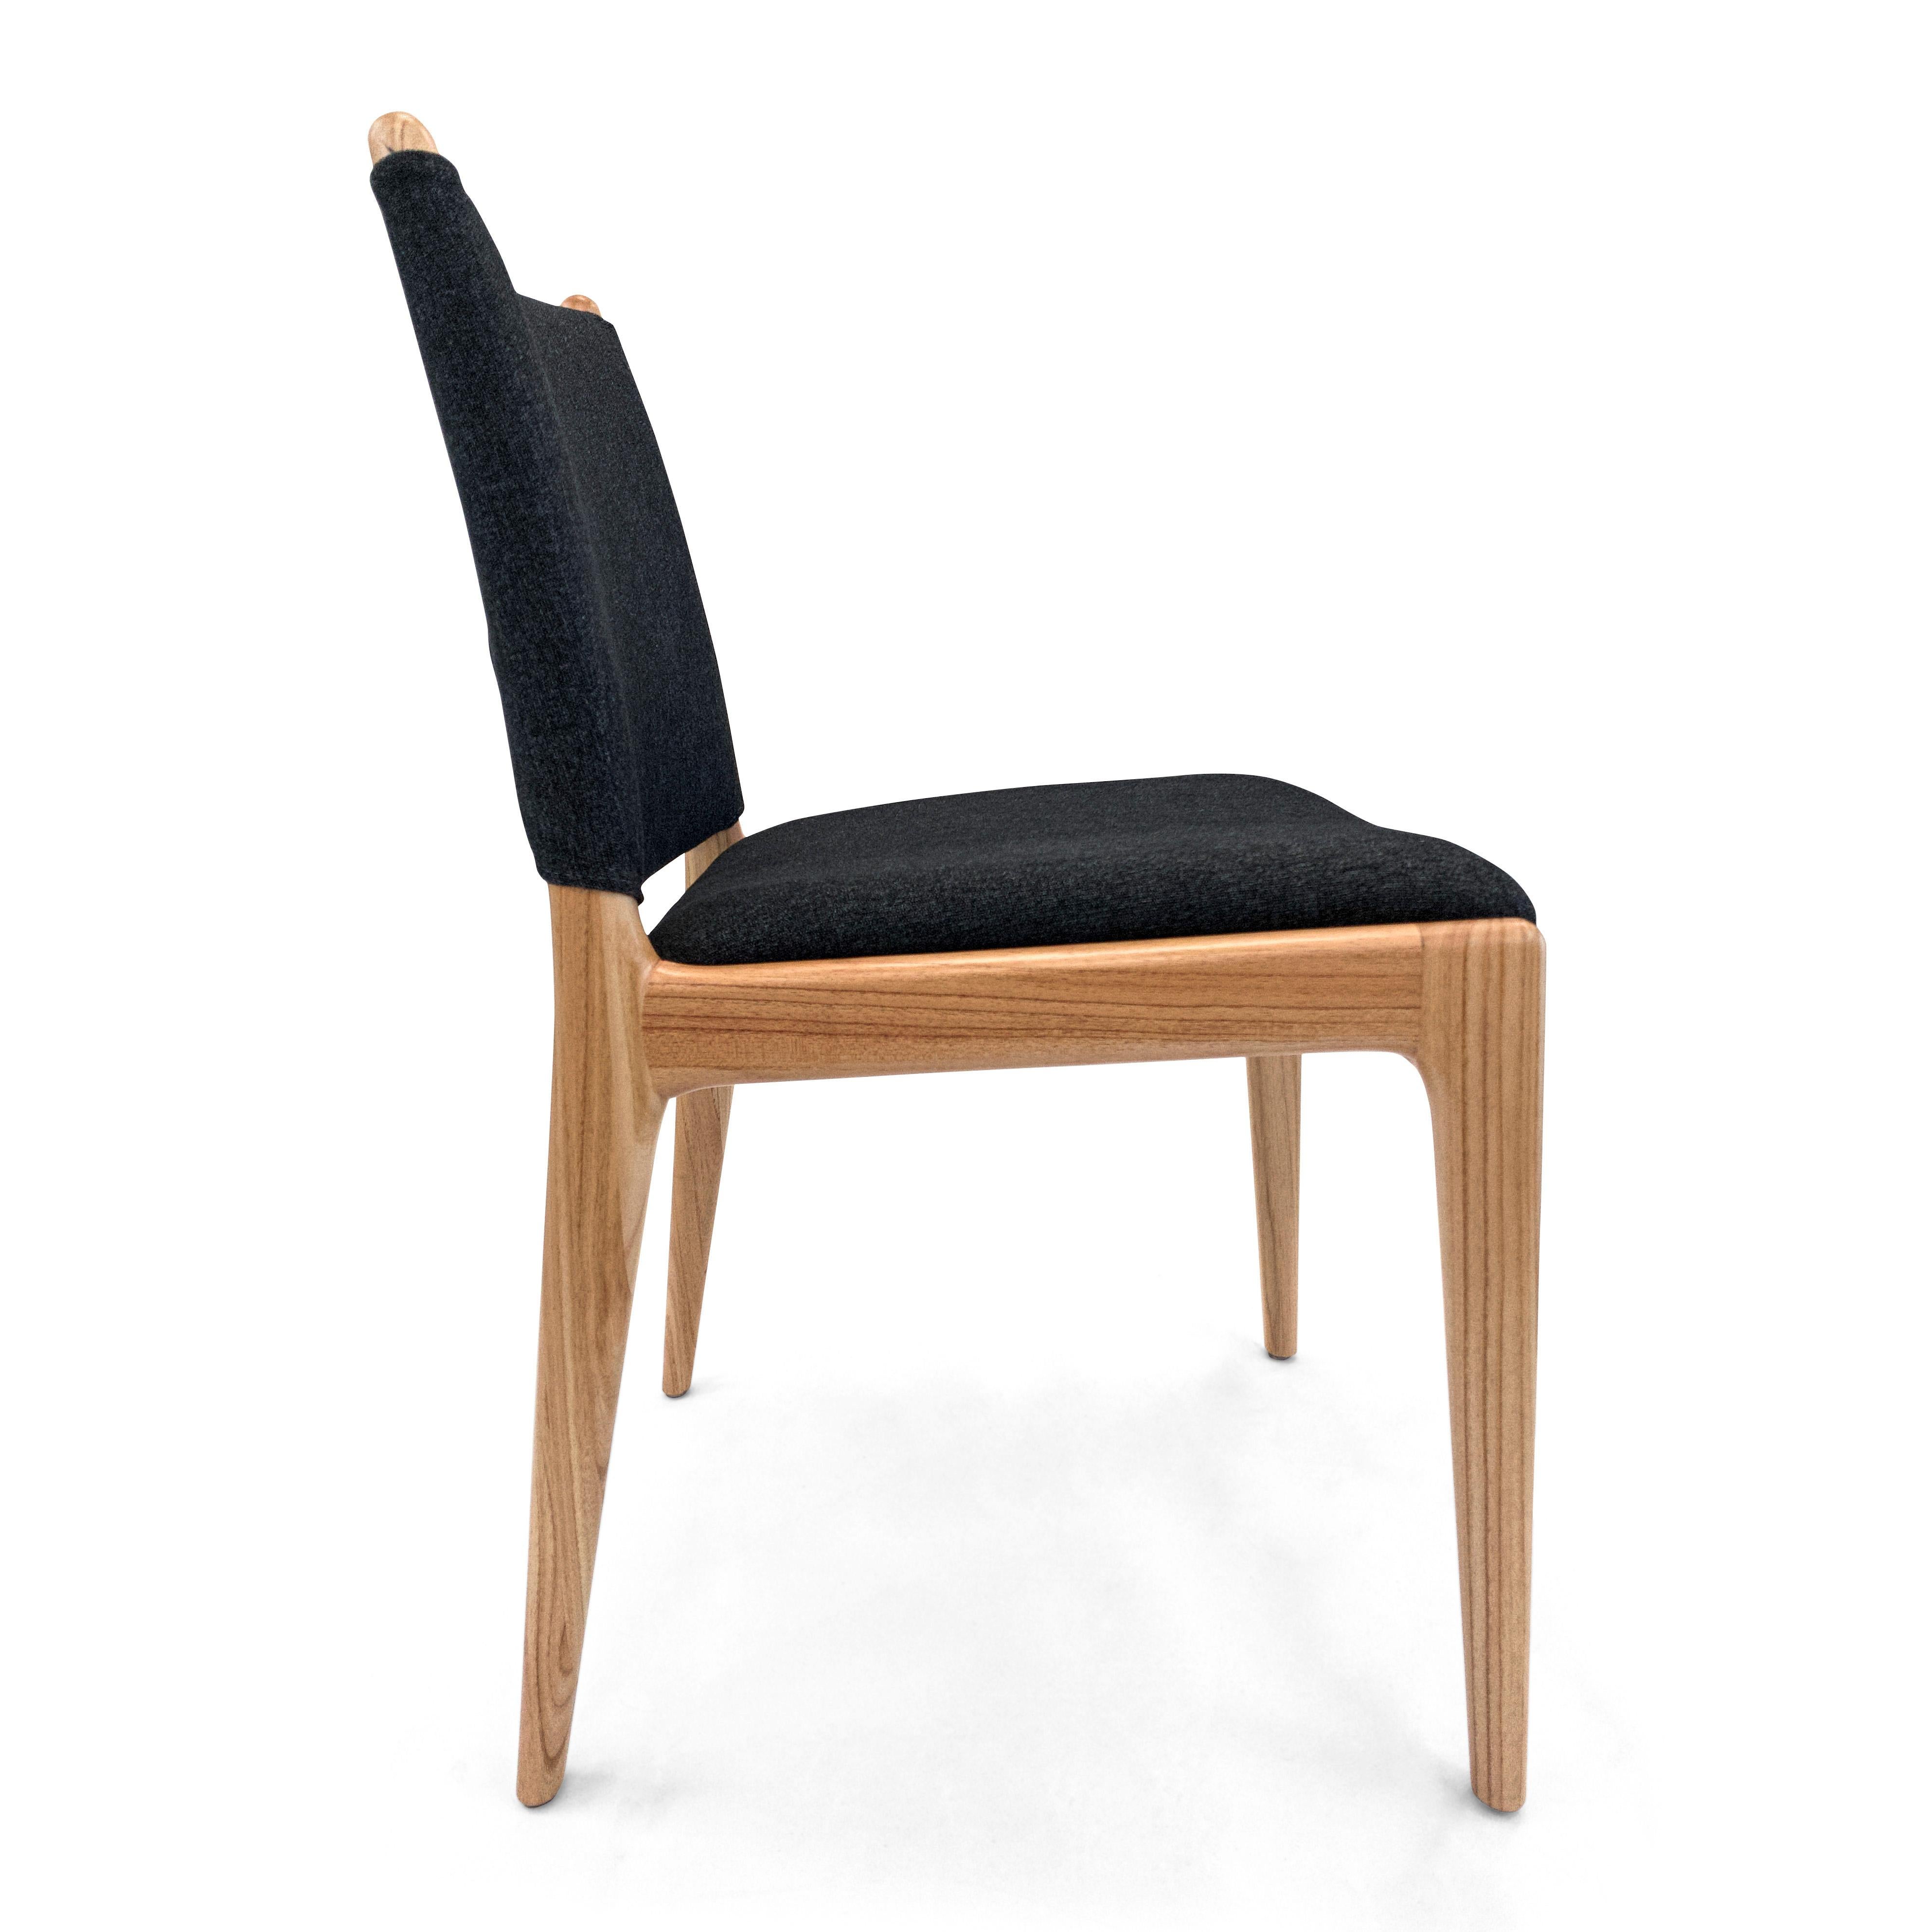 Brazilian Cappio Dining Chair in Chinaberry Wood Finish with Black Fabric, set of 2 For Sale